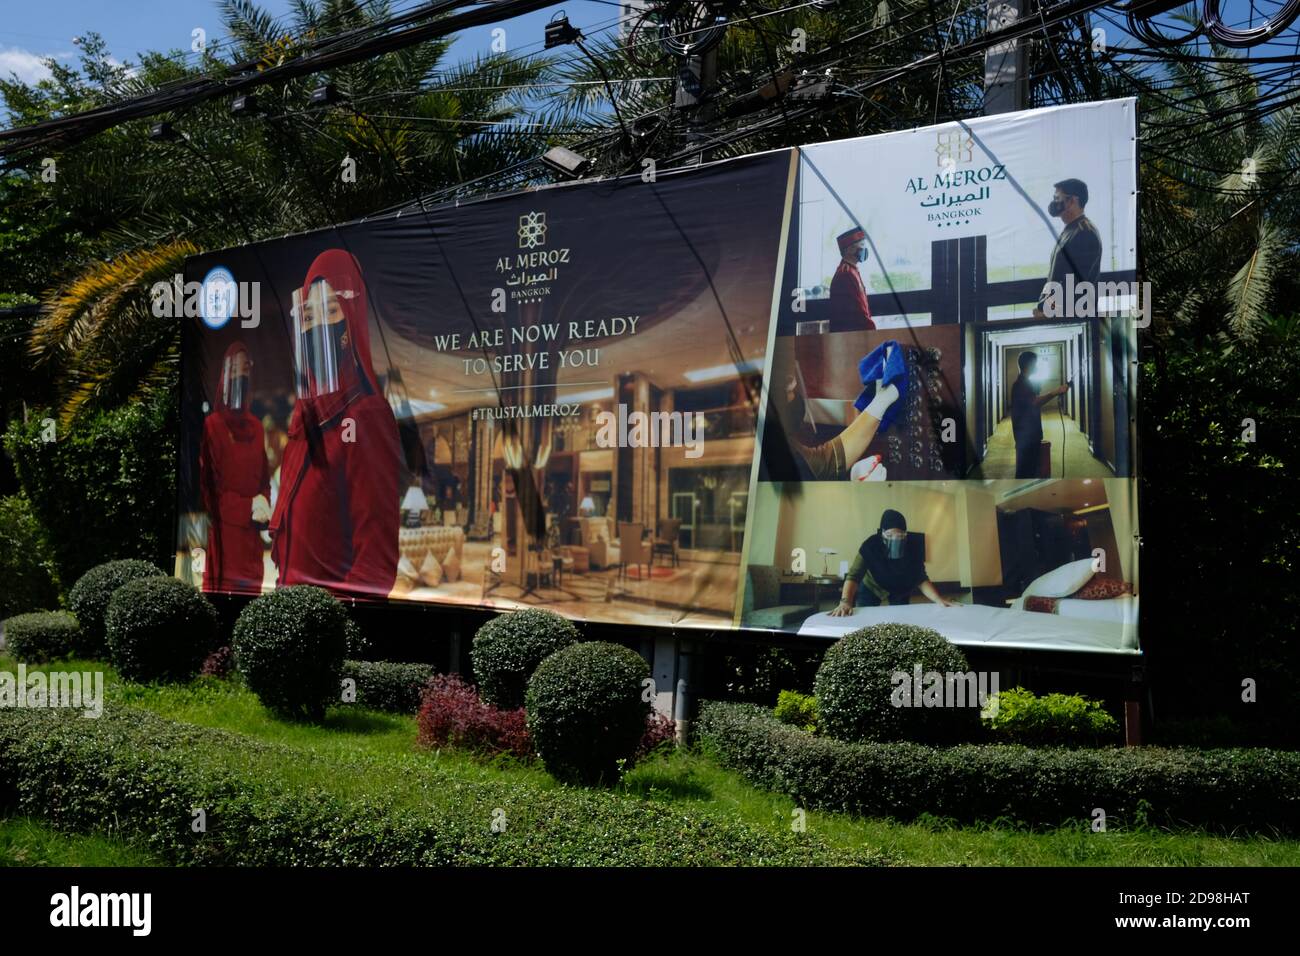 Advertising for a hotel, showing measures taken to re-open in COVID pandemic, Bangkok, Thailand Stock Photo